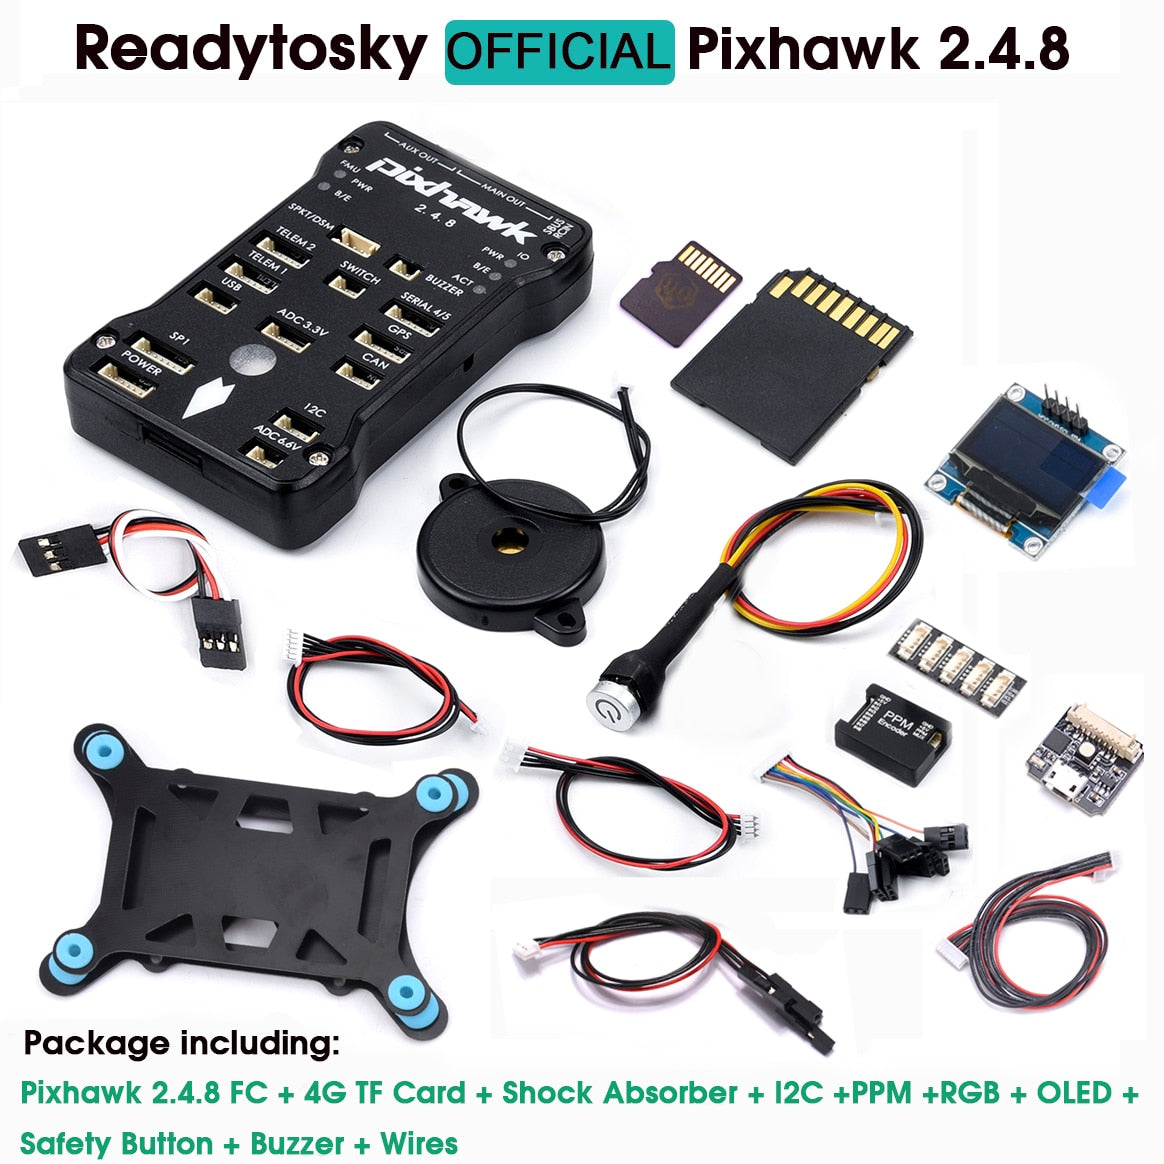 Package includes: Pixhawk 2.4.8 FC + 4G TF Card + Shock Ab